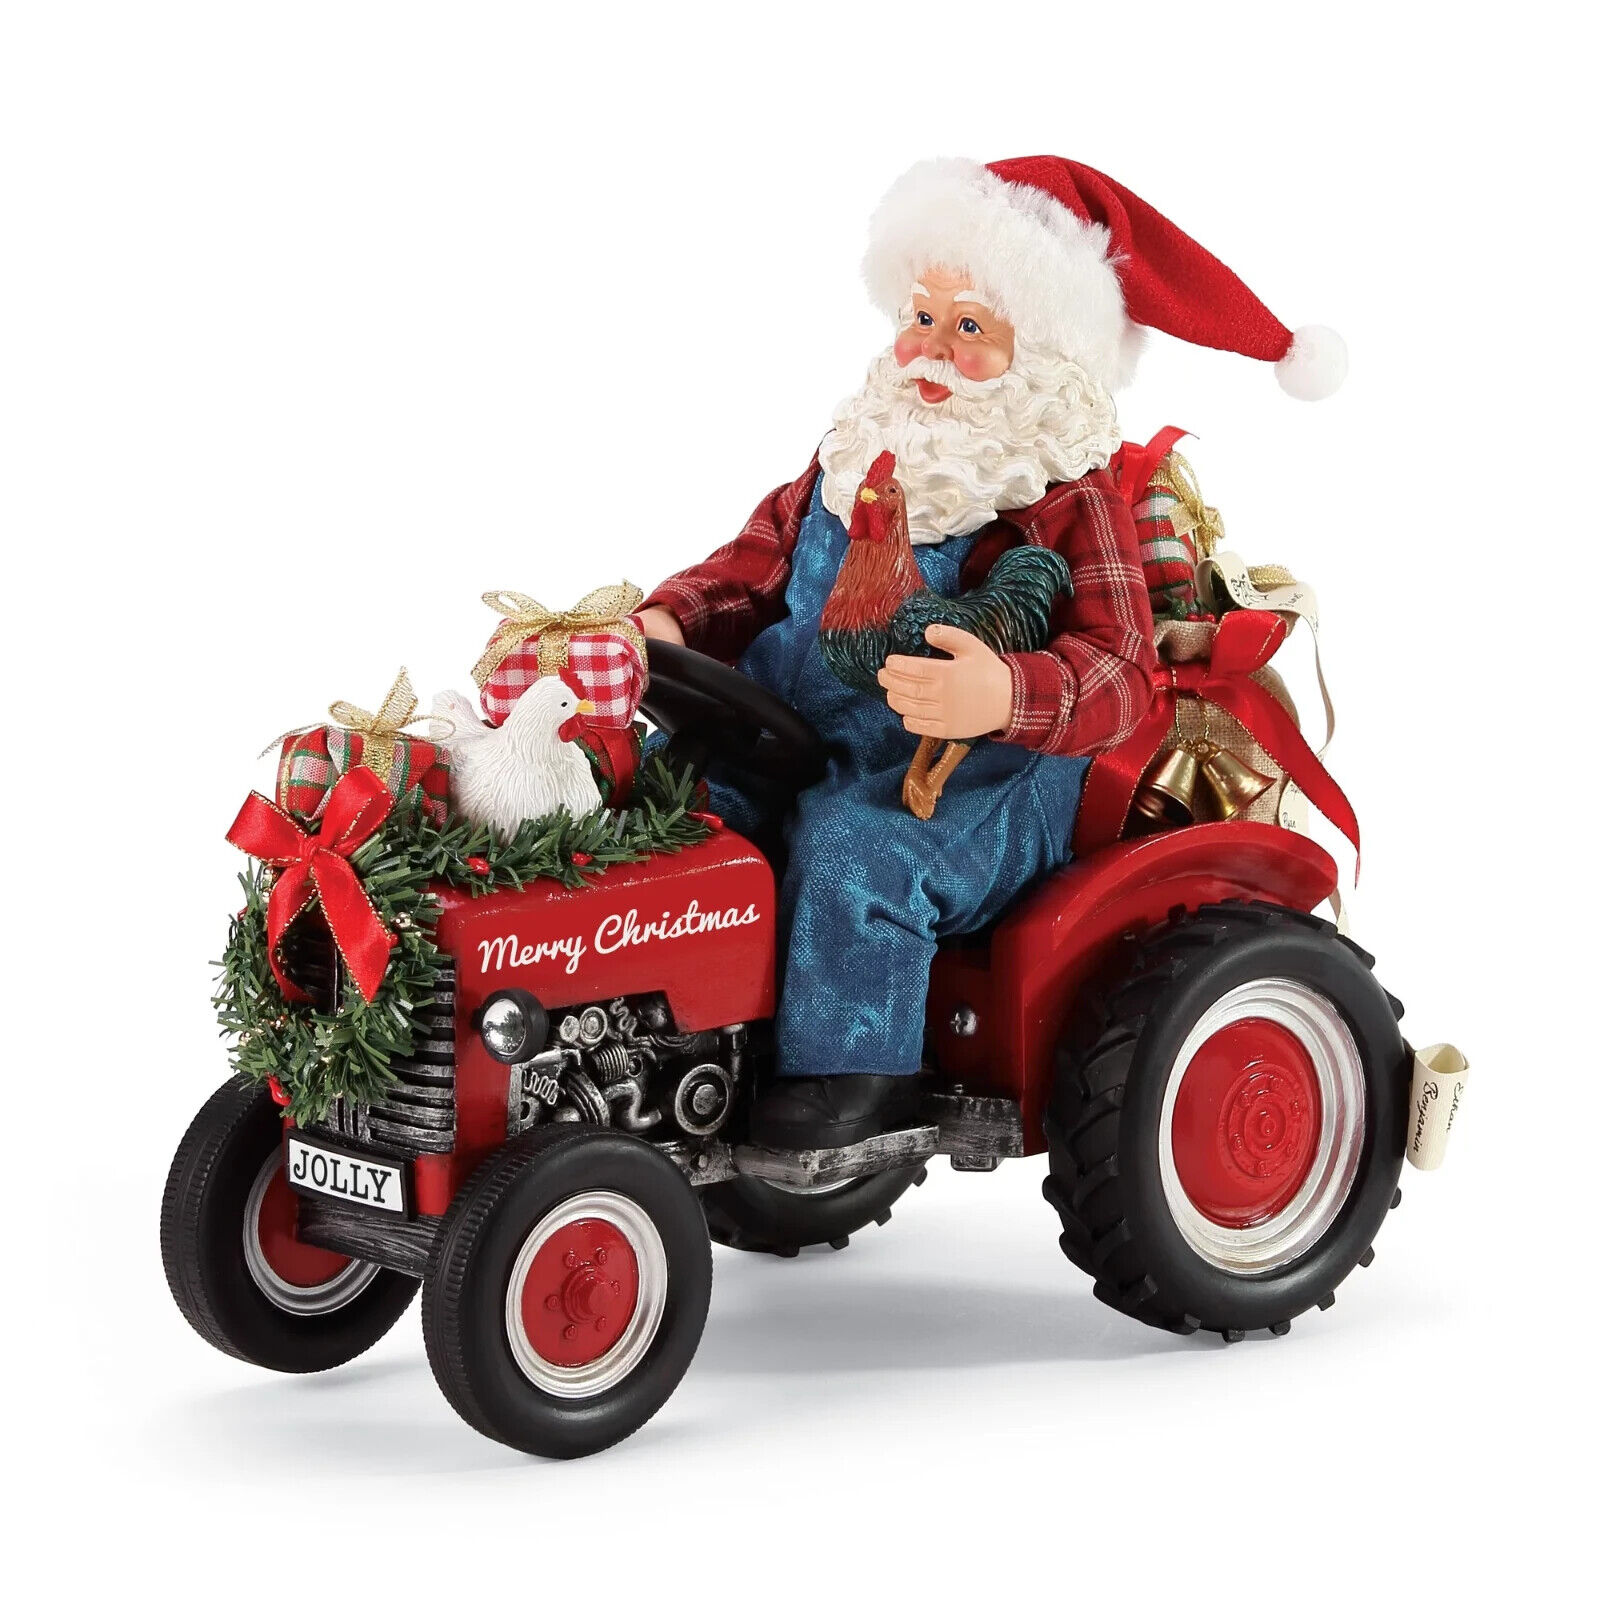 Dept 56 Possible Dreams COUNTRY LIVING  SANTA DRIVING TRACTOR 6006028 NEW IN BOX